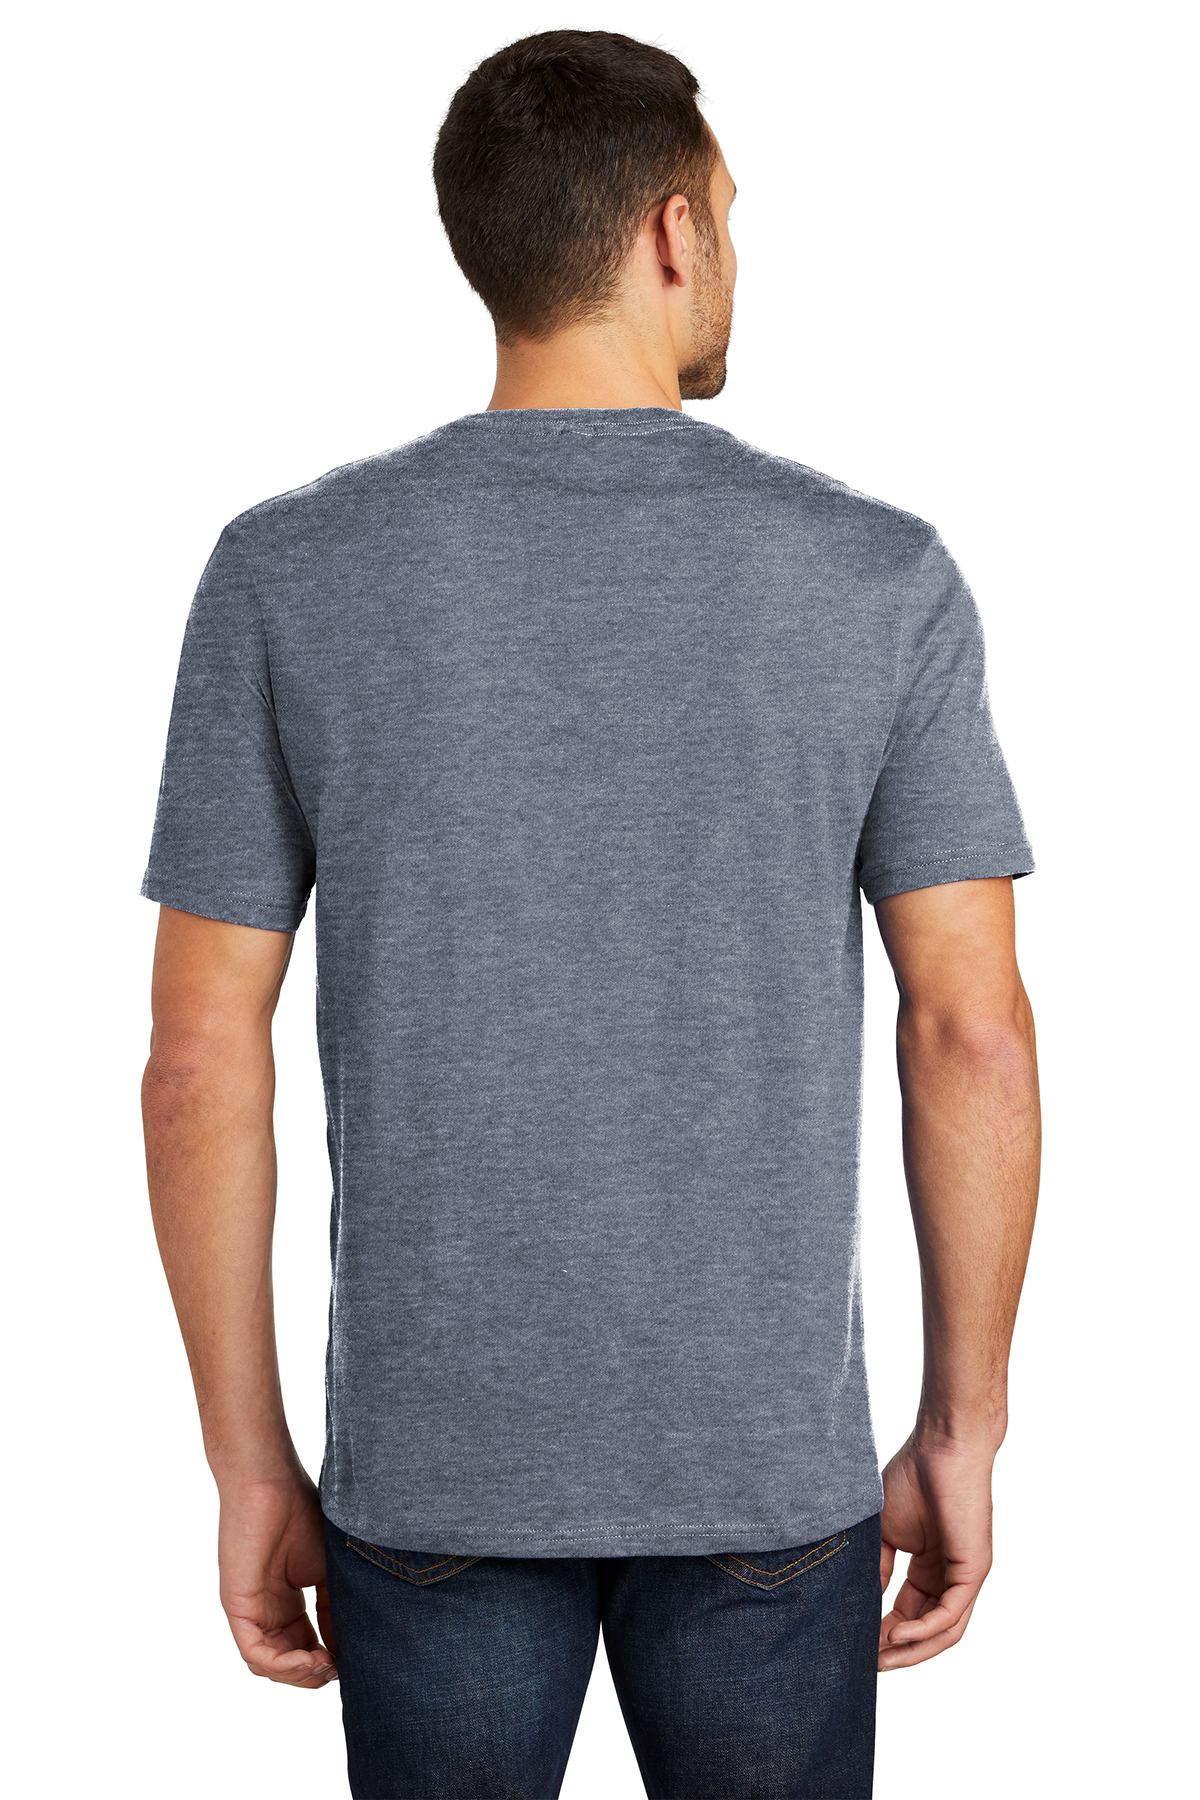 District Perfect Weight Tee | Product | SanMar